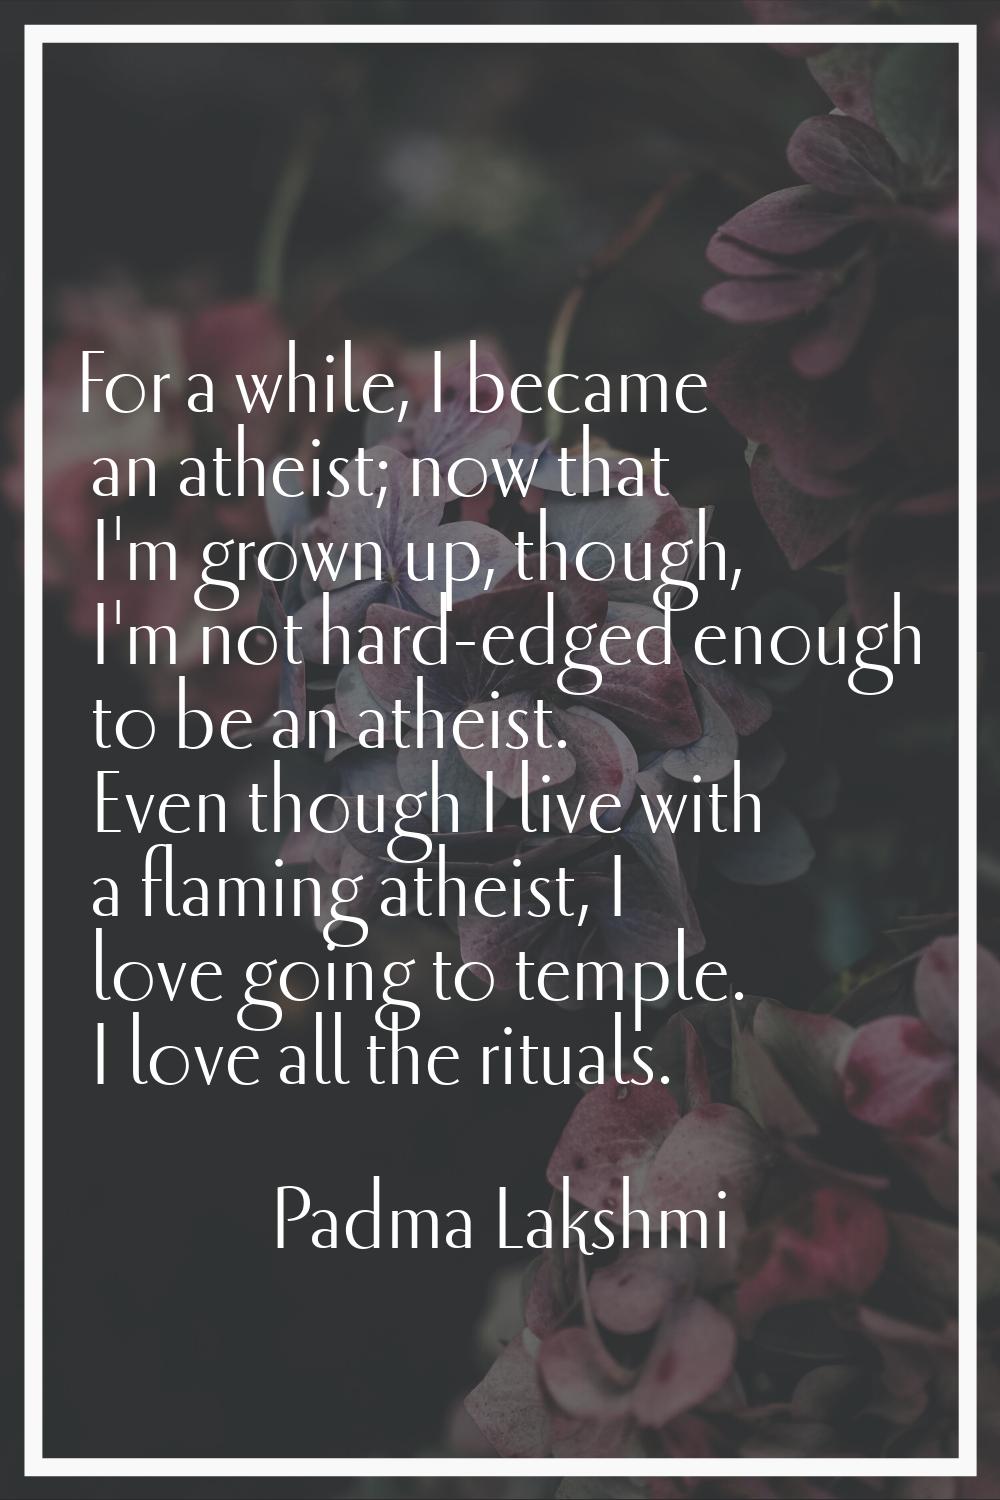 For a while, I became an atheist; now that I'm grown up, though, I'm not hard-edged enough to be an